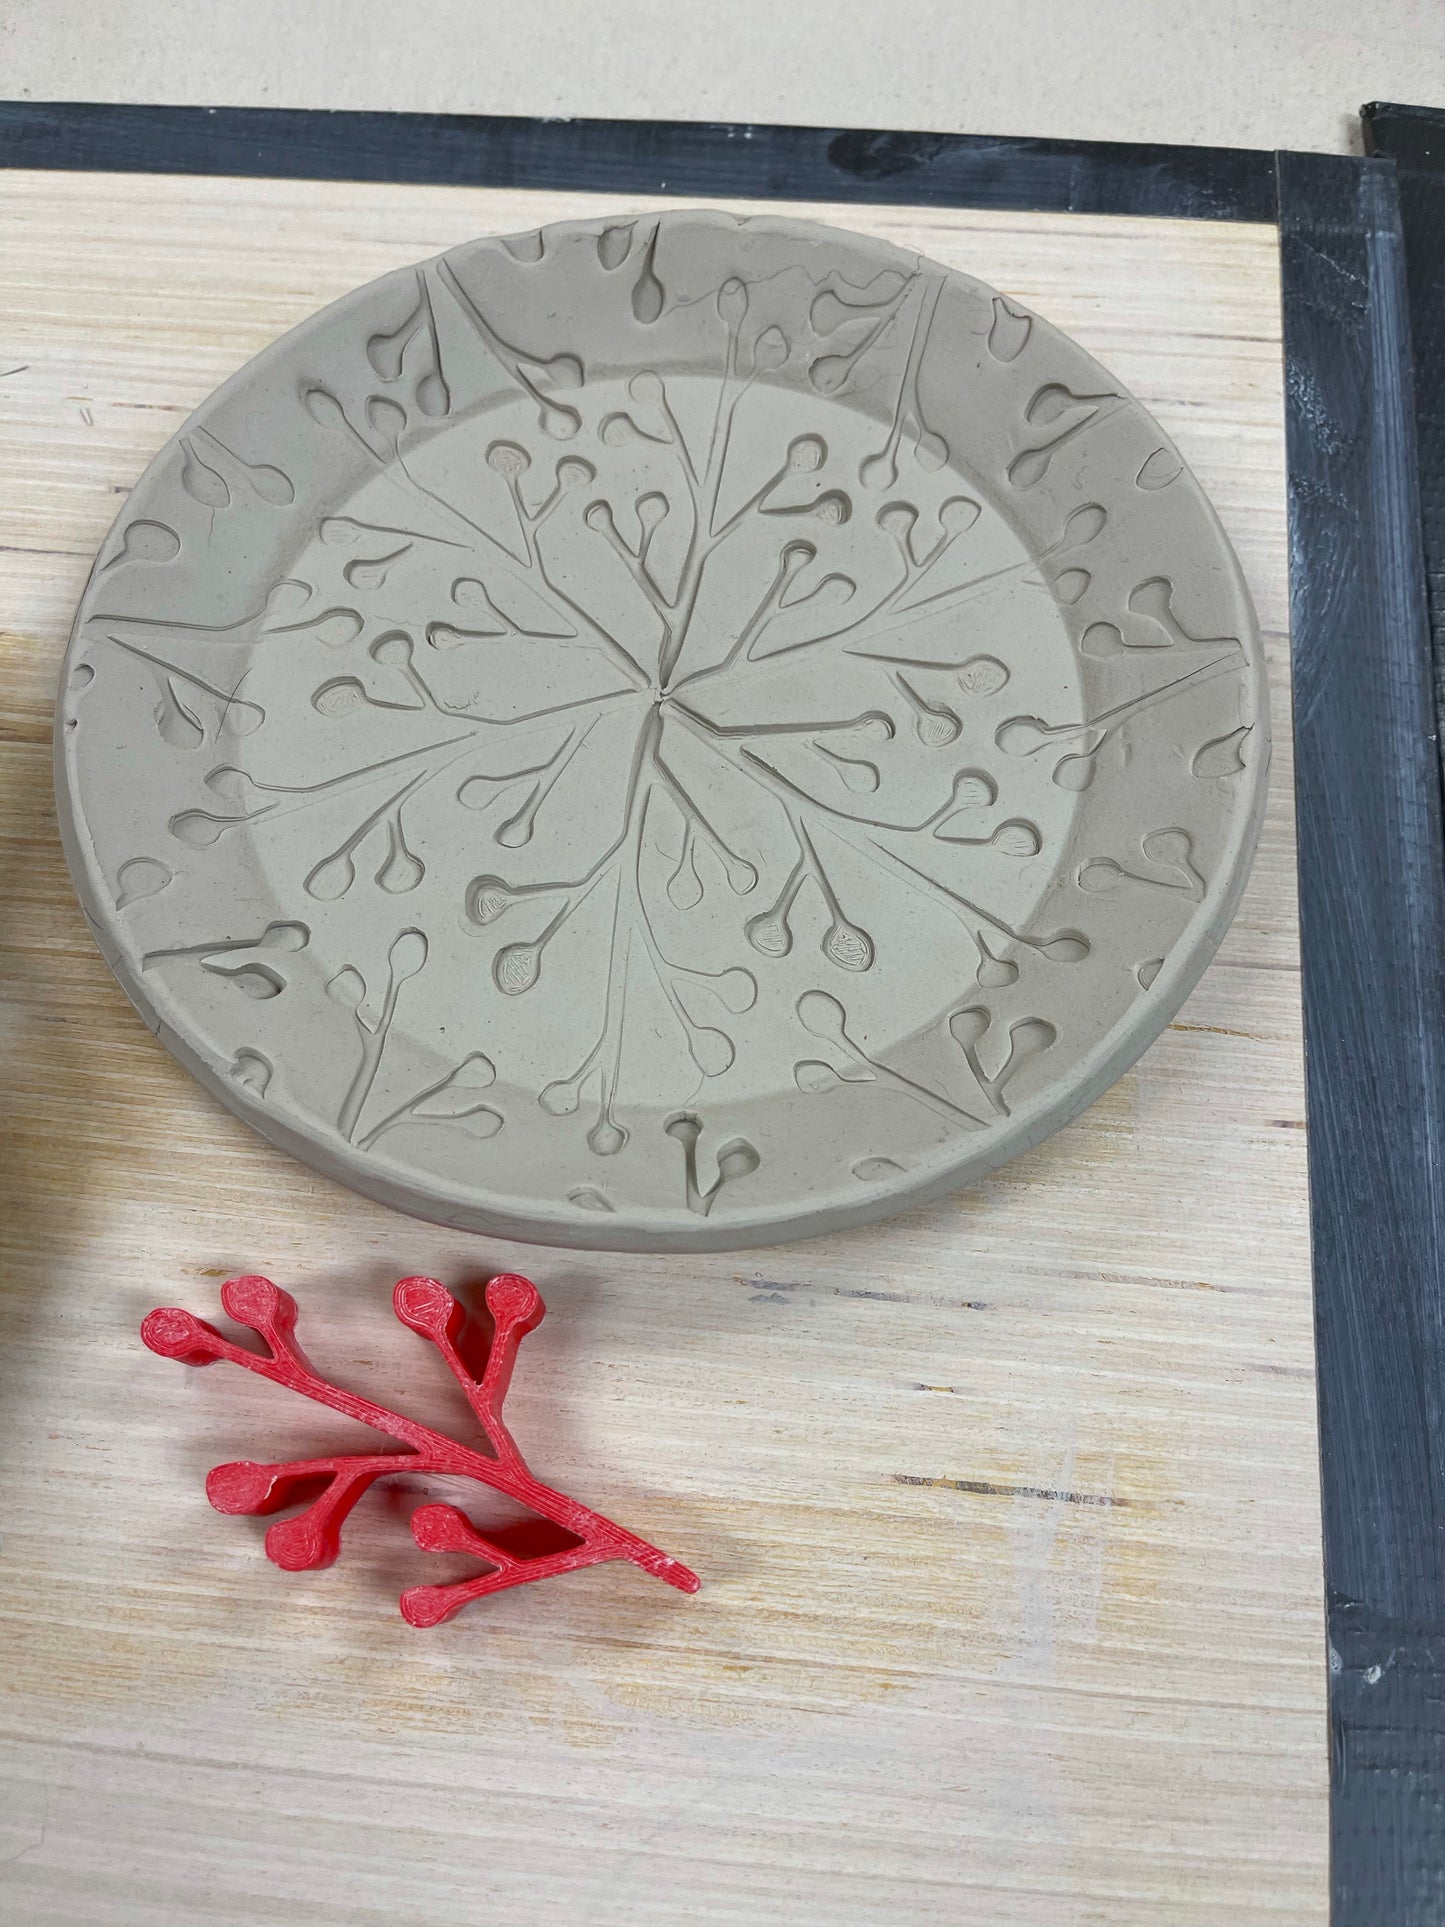 Greenery3 Pottery Stamp Branch Design - 3D Printed Multiple Sizes